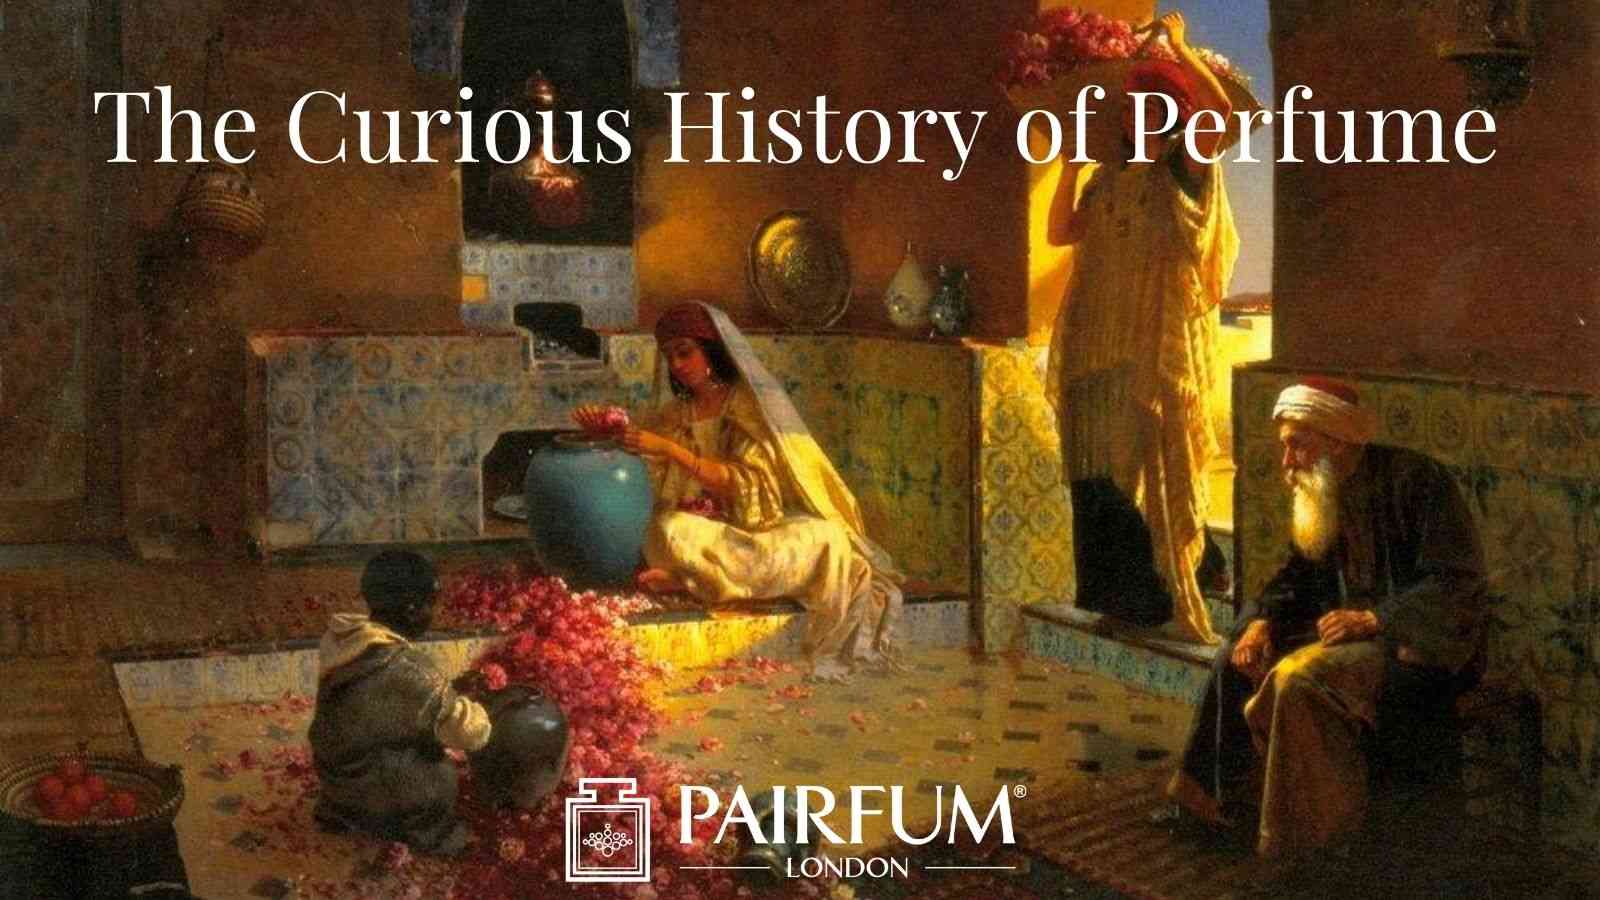 Lord History Of Perfume